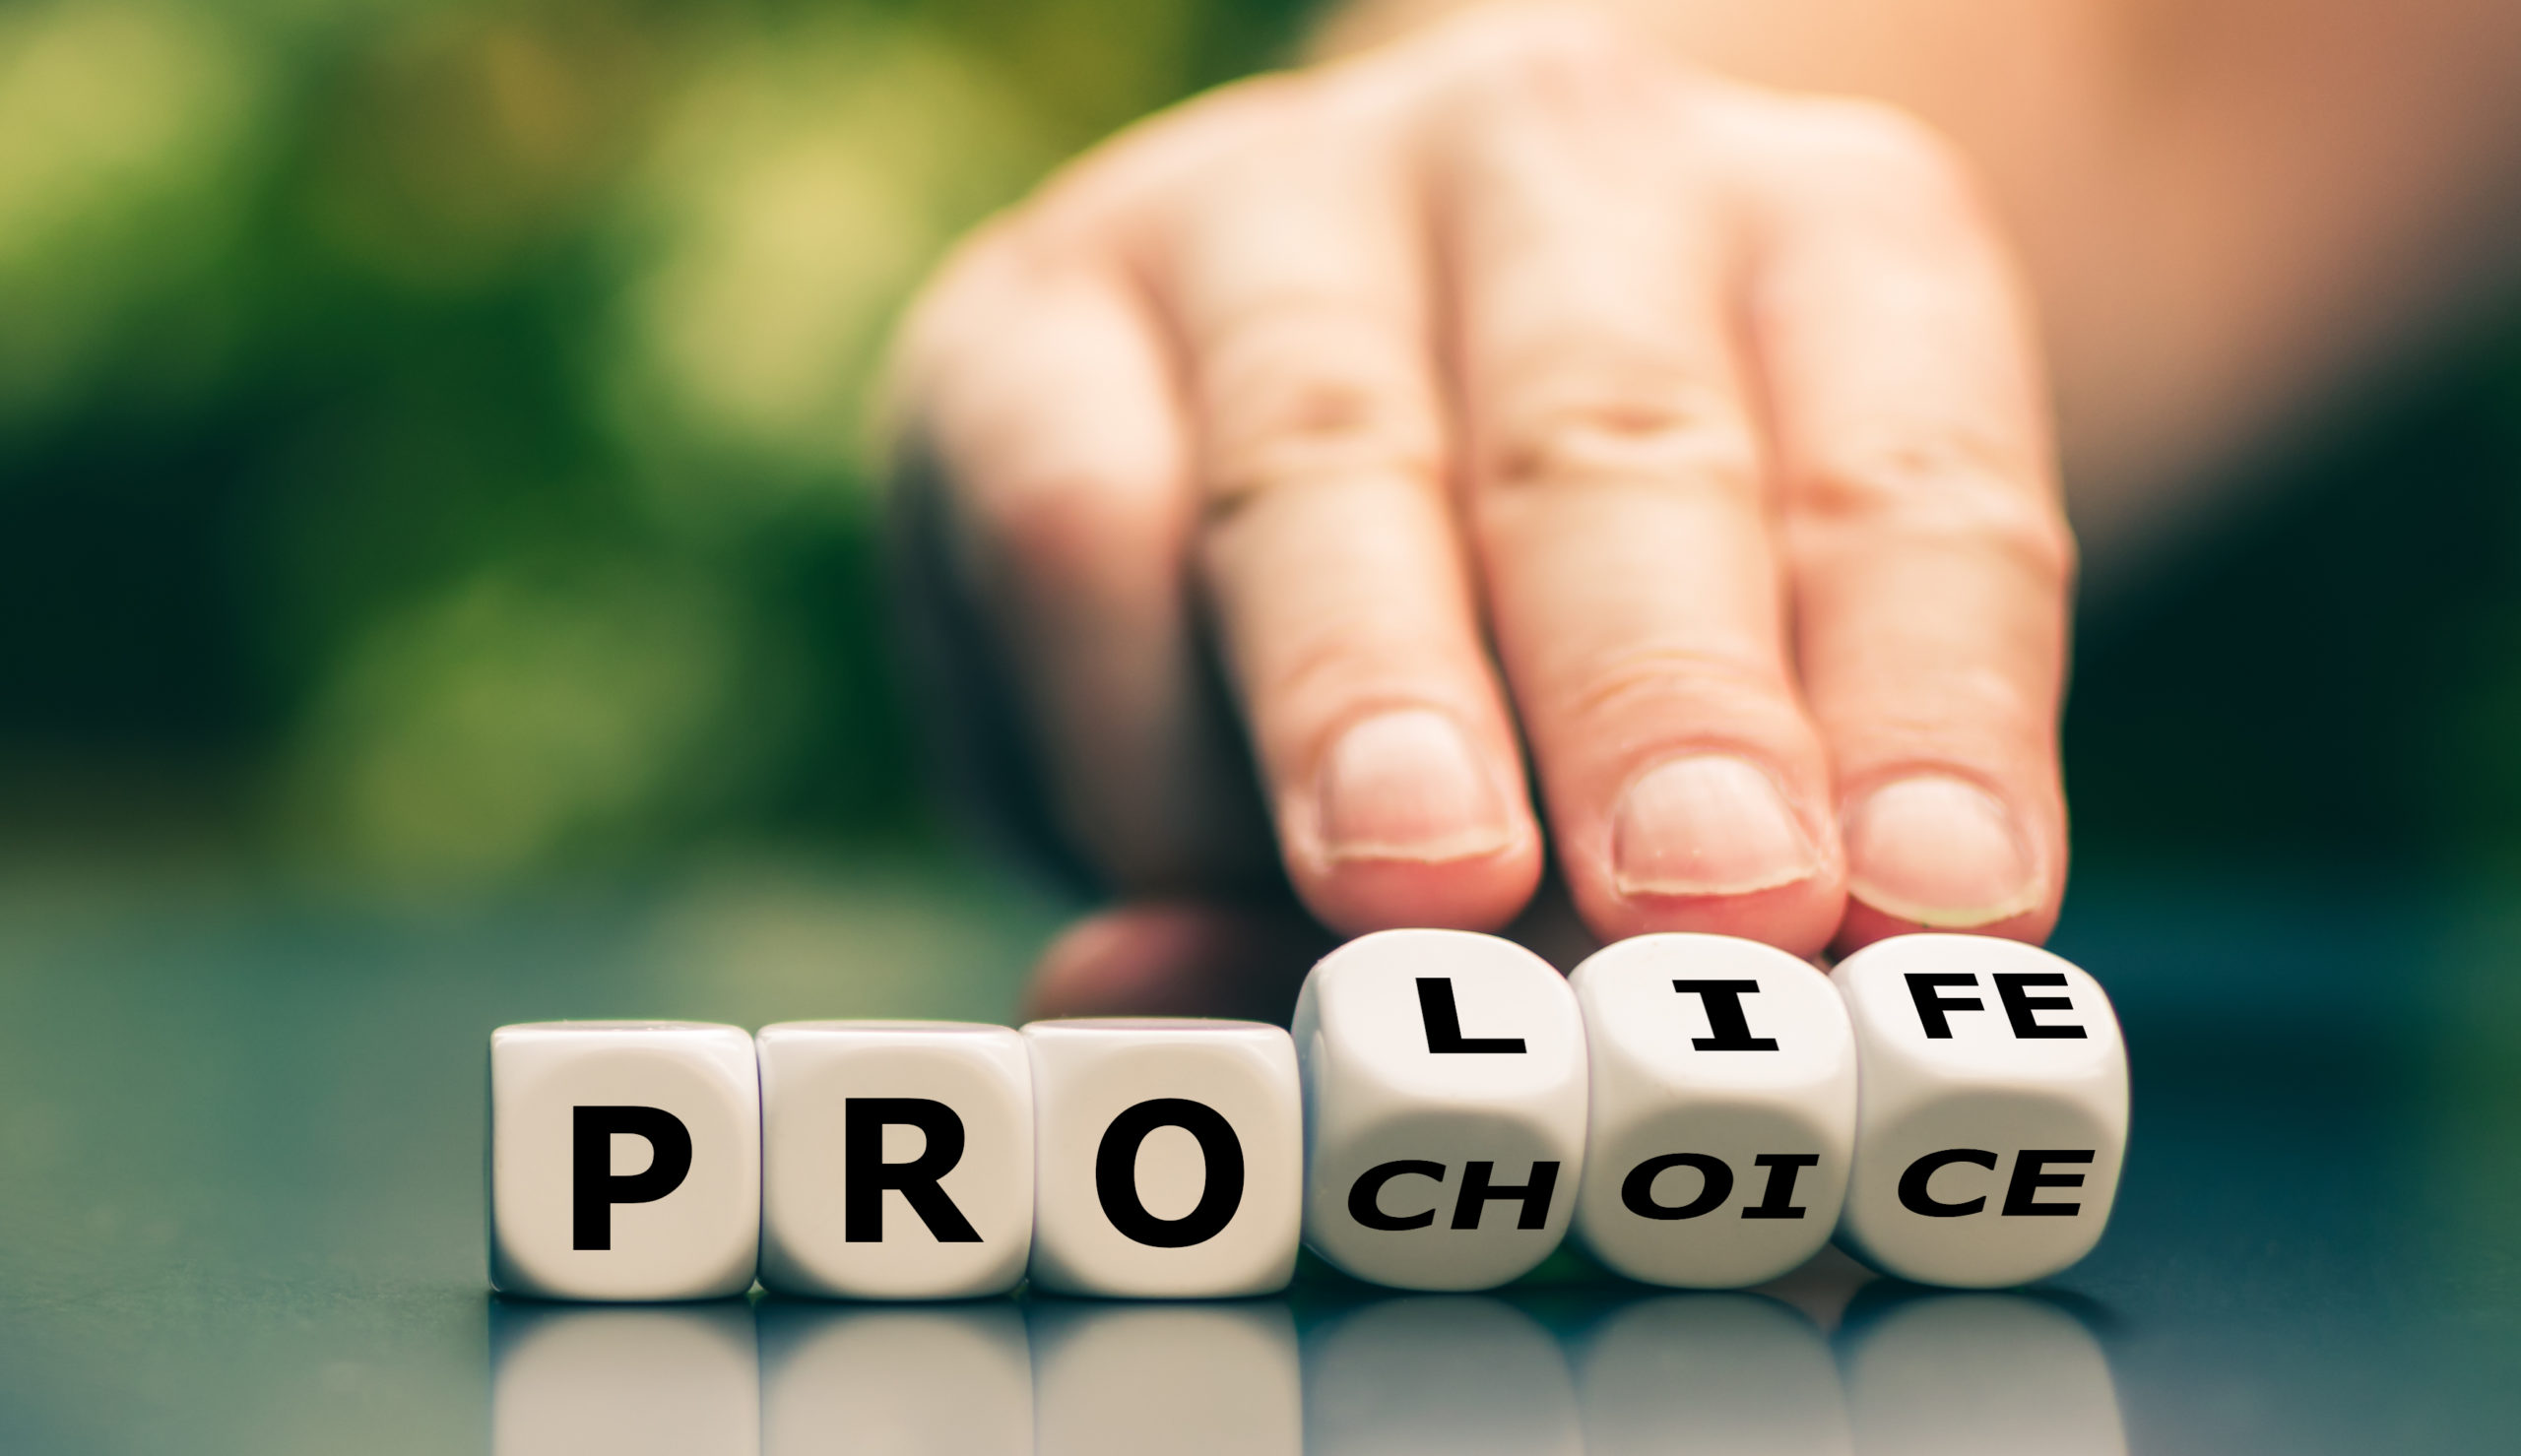 Pro-Life and Pro-Choice Perspectives on Abortion